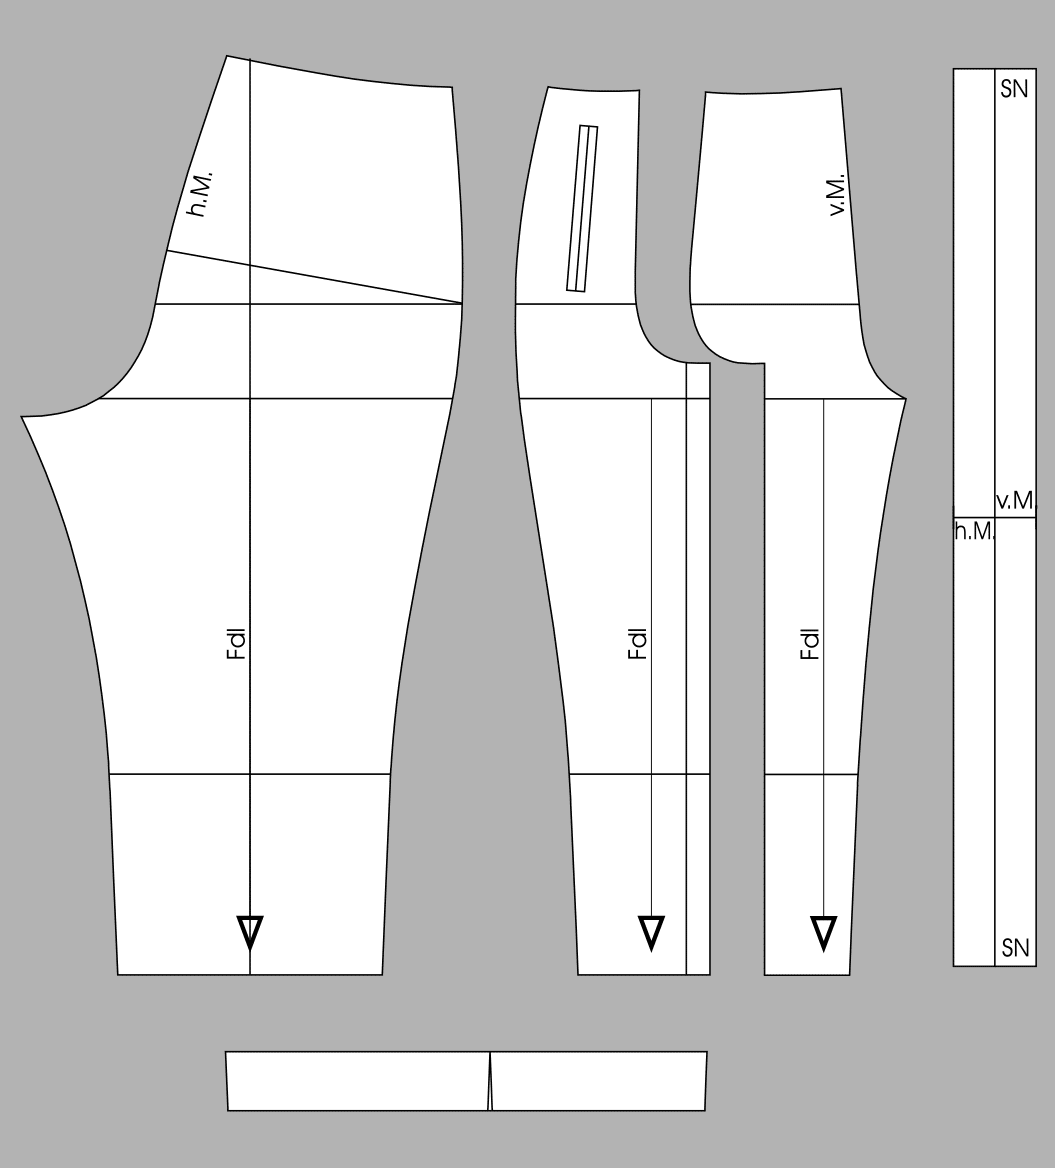 6EN | Trousers pattern, Sewing pants, Sewing techniques